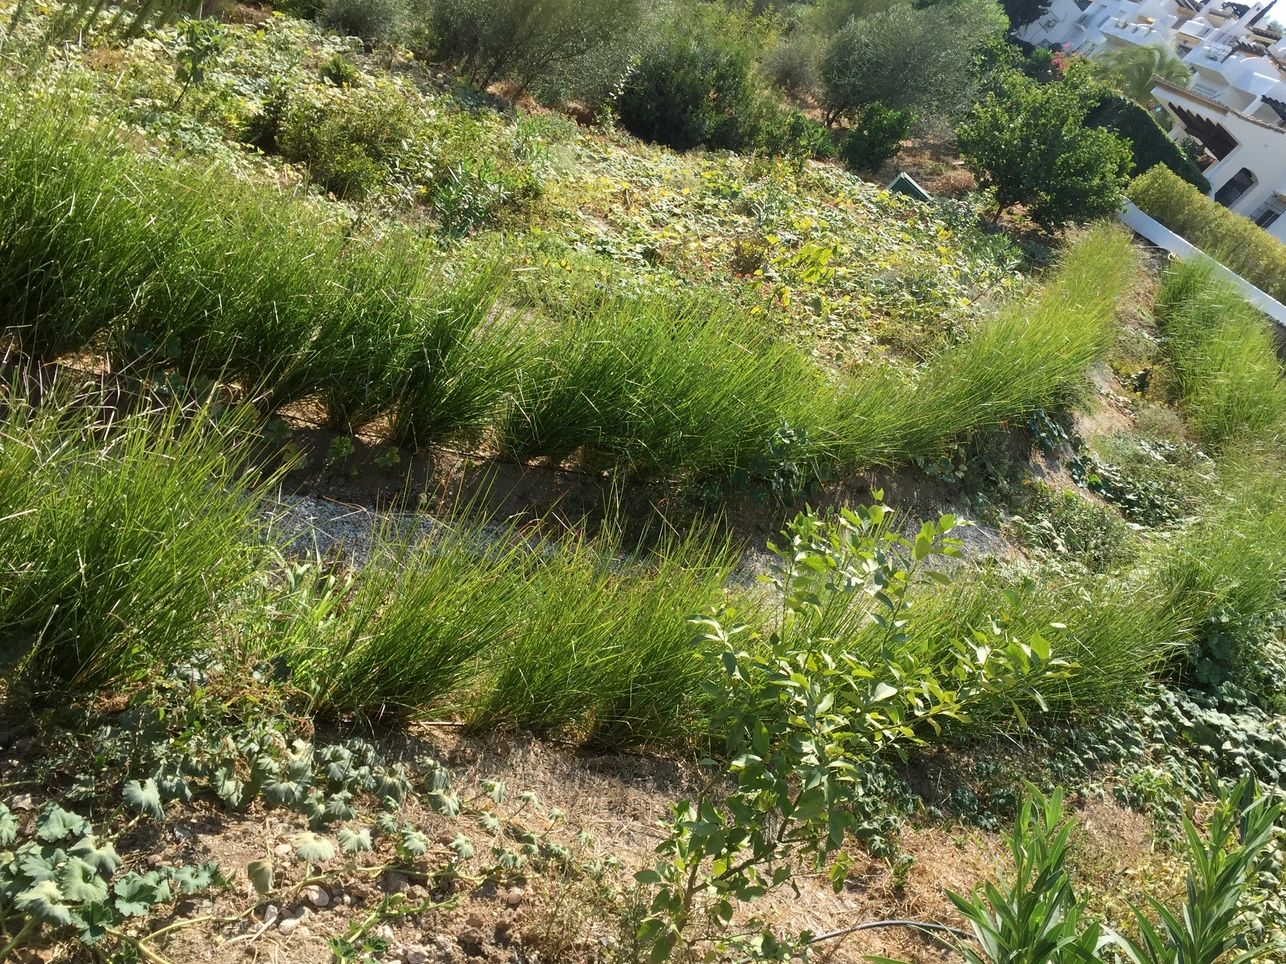 Chrysopogon zizanioides, commonly known as vetiver and khus planted in Spain